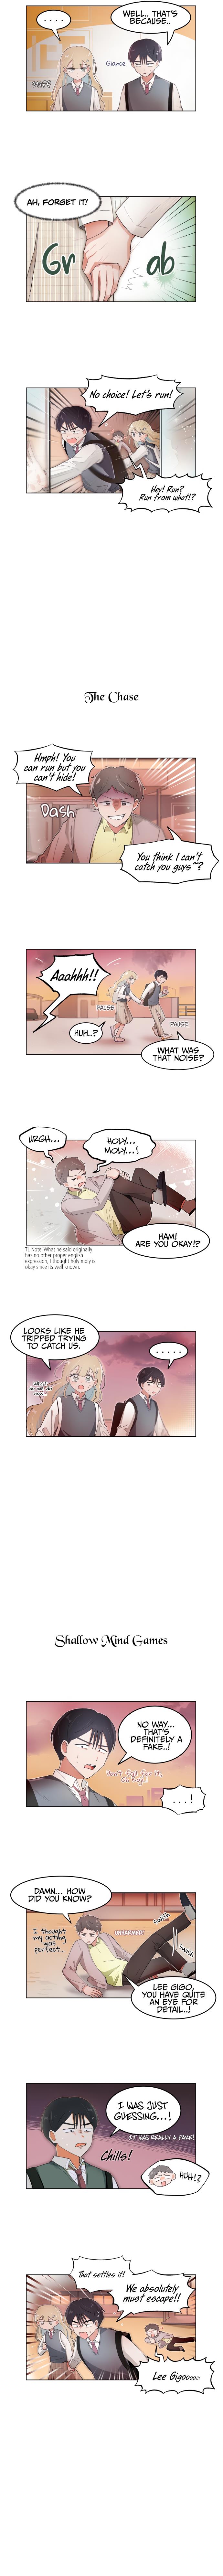 I Only Want To Beat You - Page 4